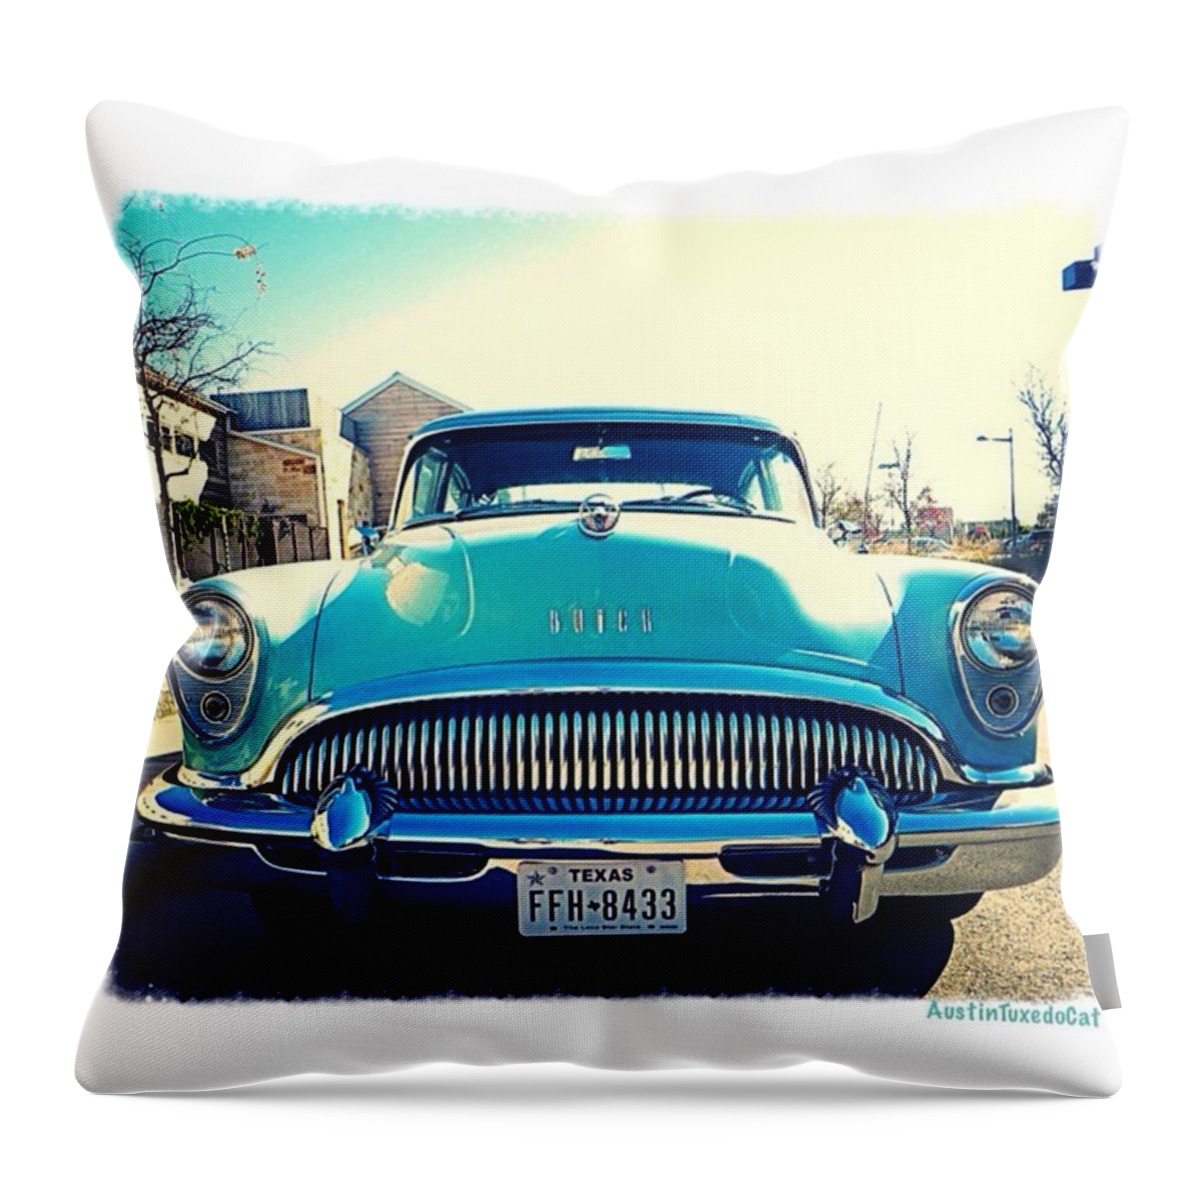 Old Throw Pillow featuring the photograph Hope Your #friday Is As #stylish As by Austin Tuxedo Cat